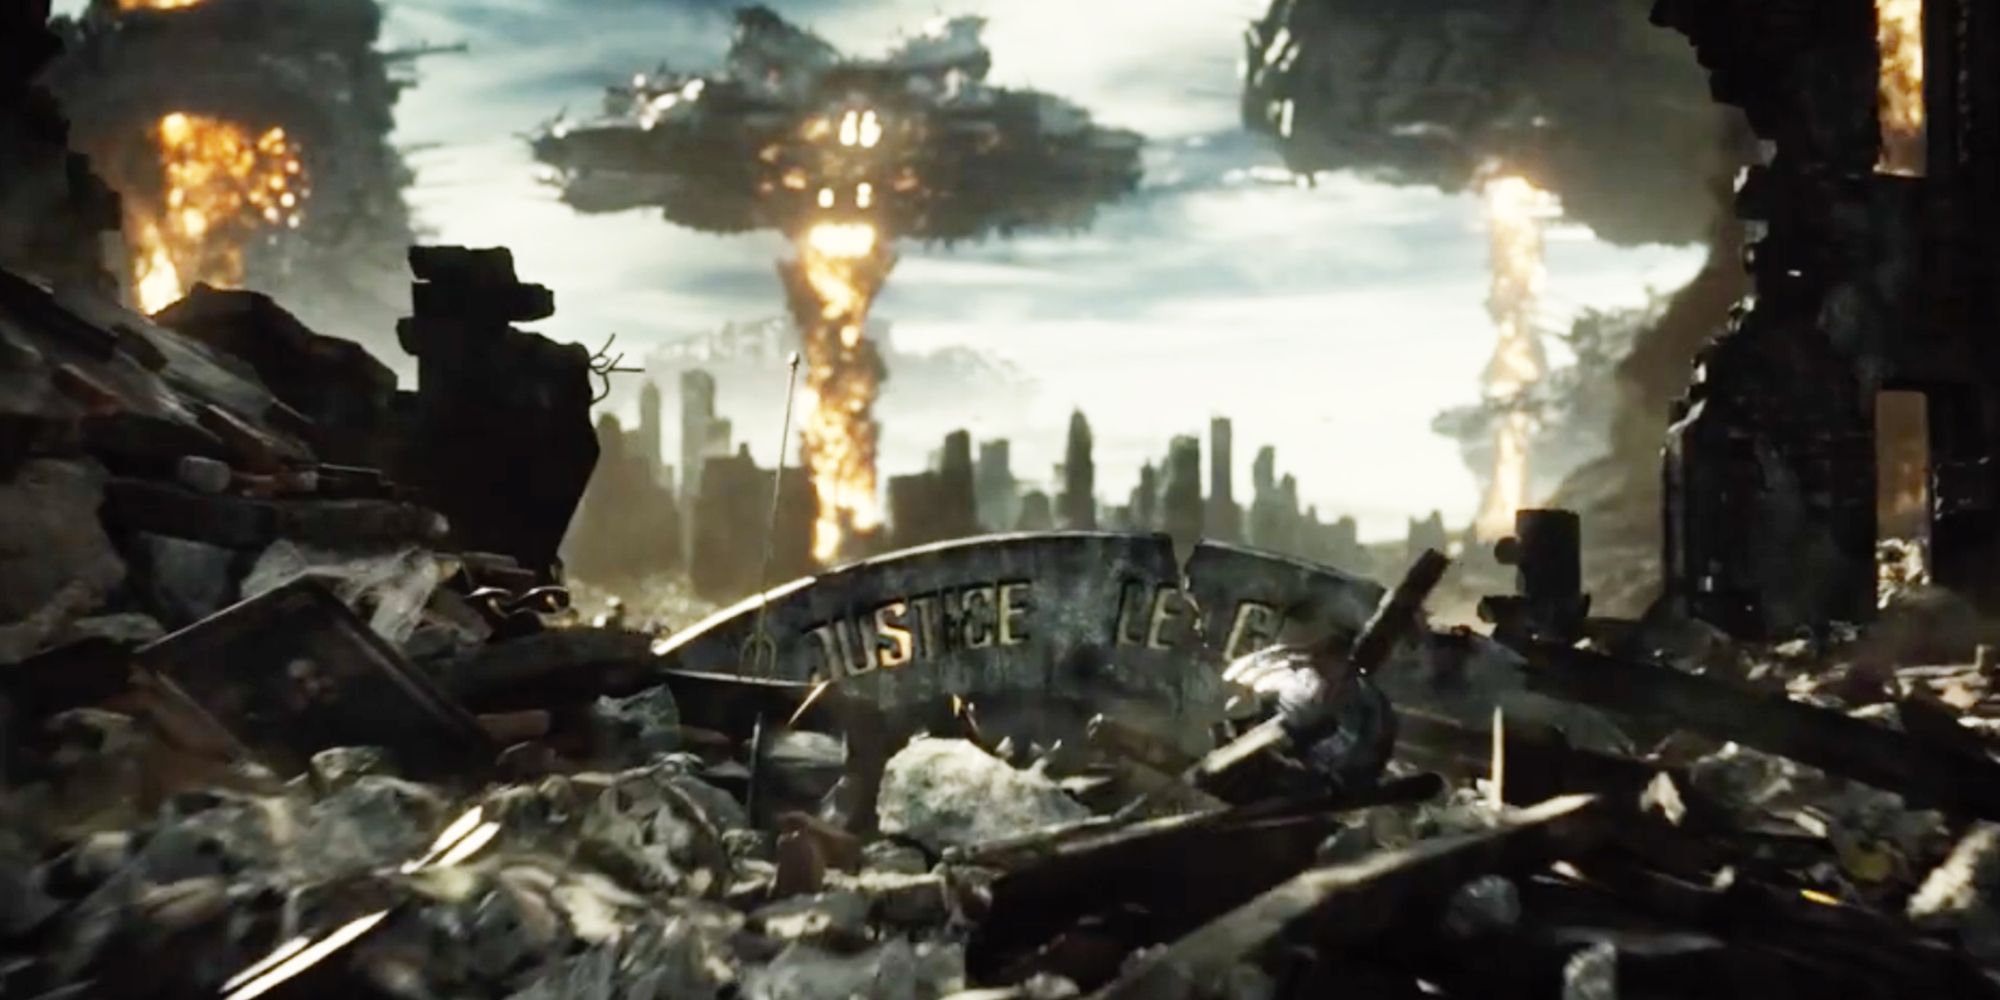 A Justice League sign is seen amid the rubble of Wayne Manor in the Knightmare Scene from Zack Snyder's Justice League